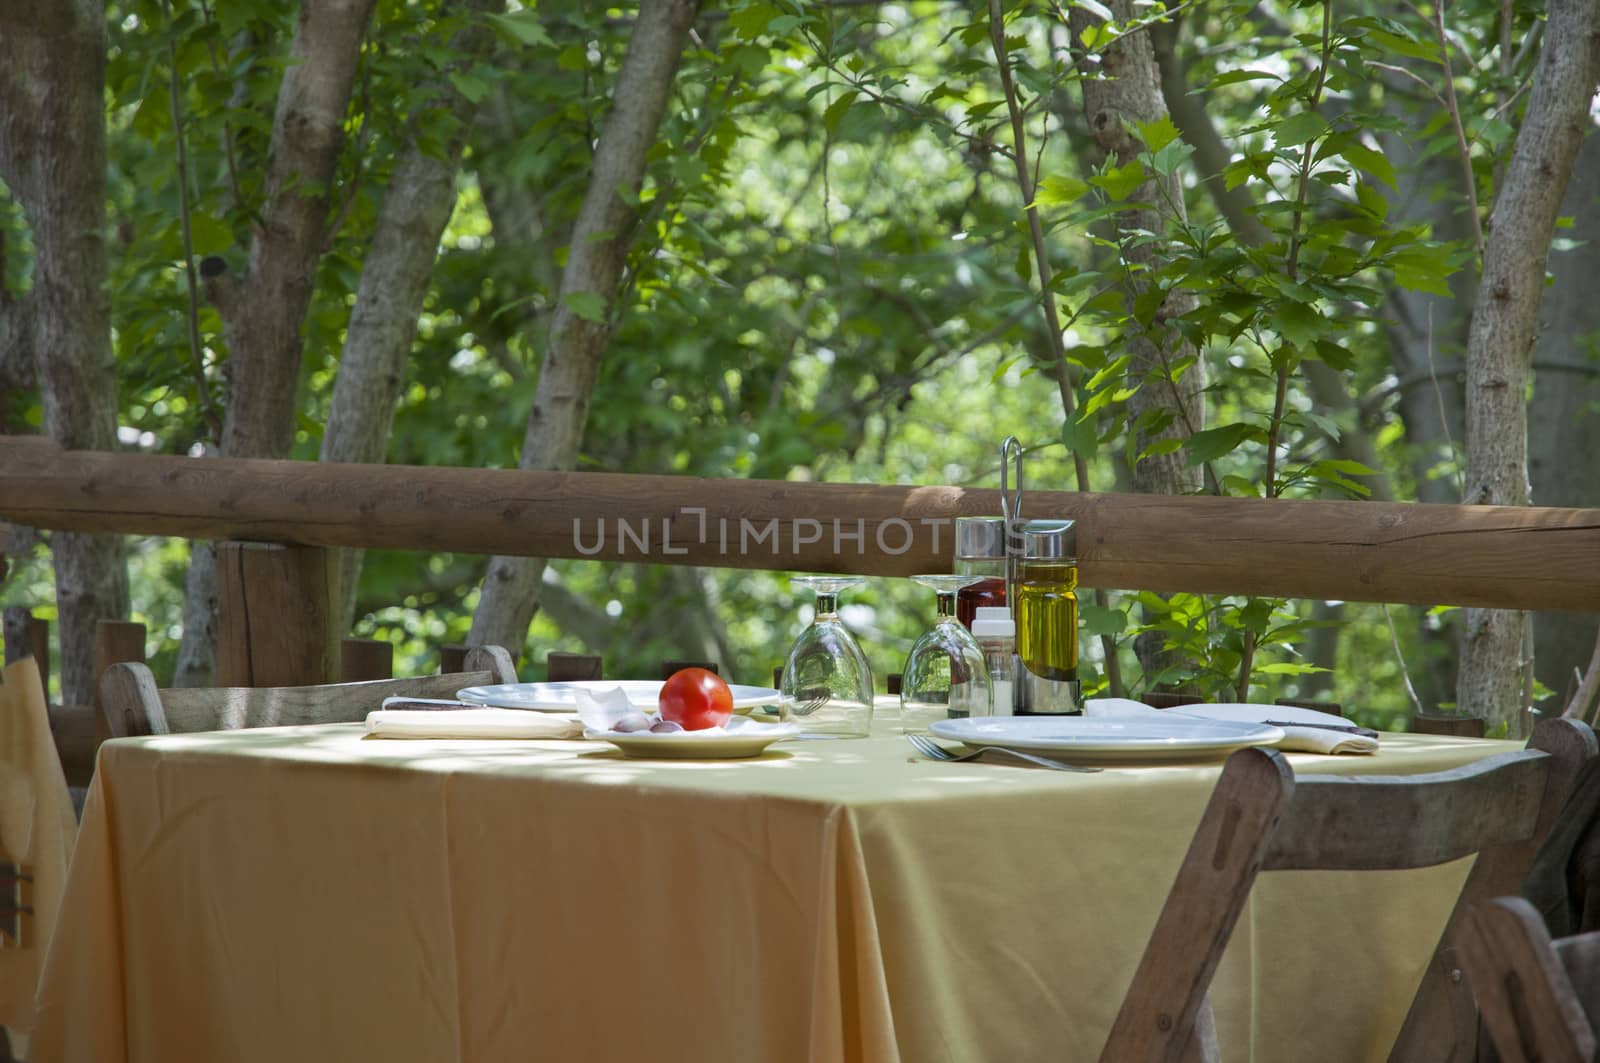 table prepared by nature